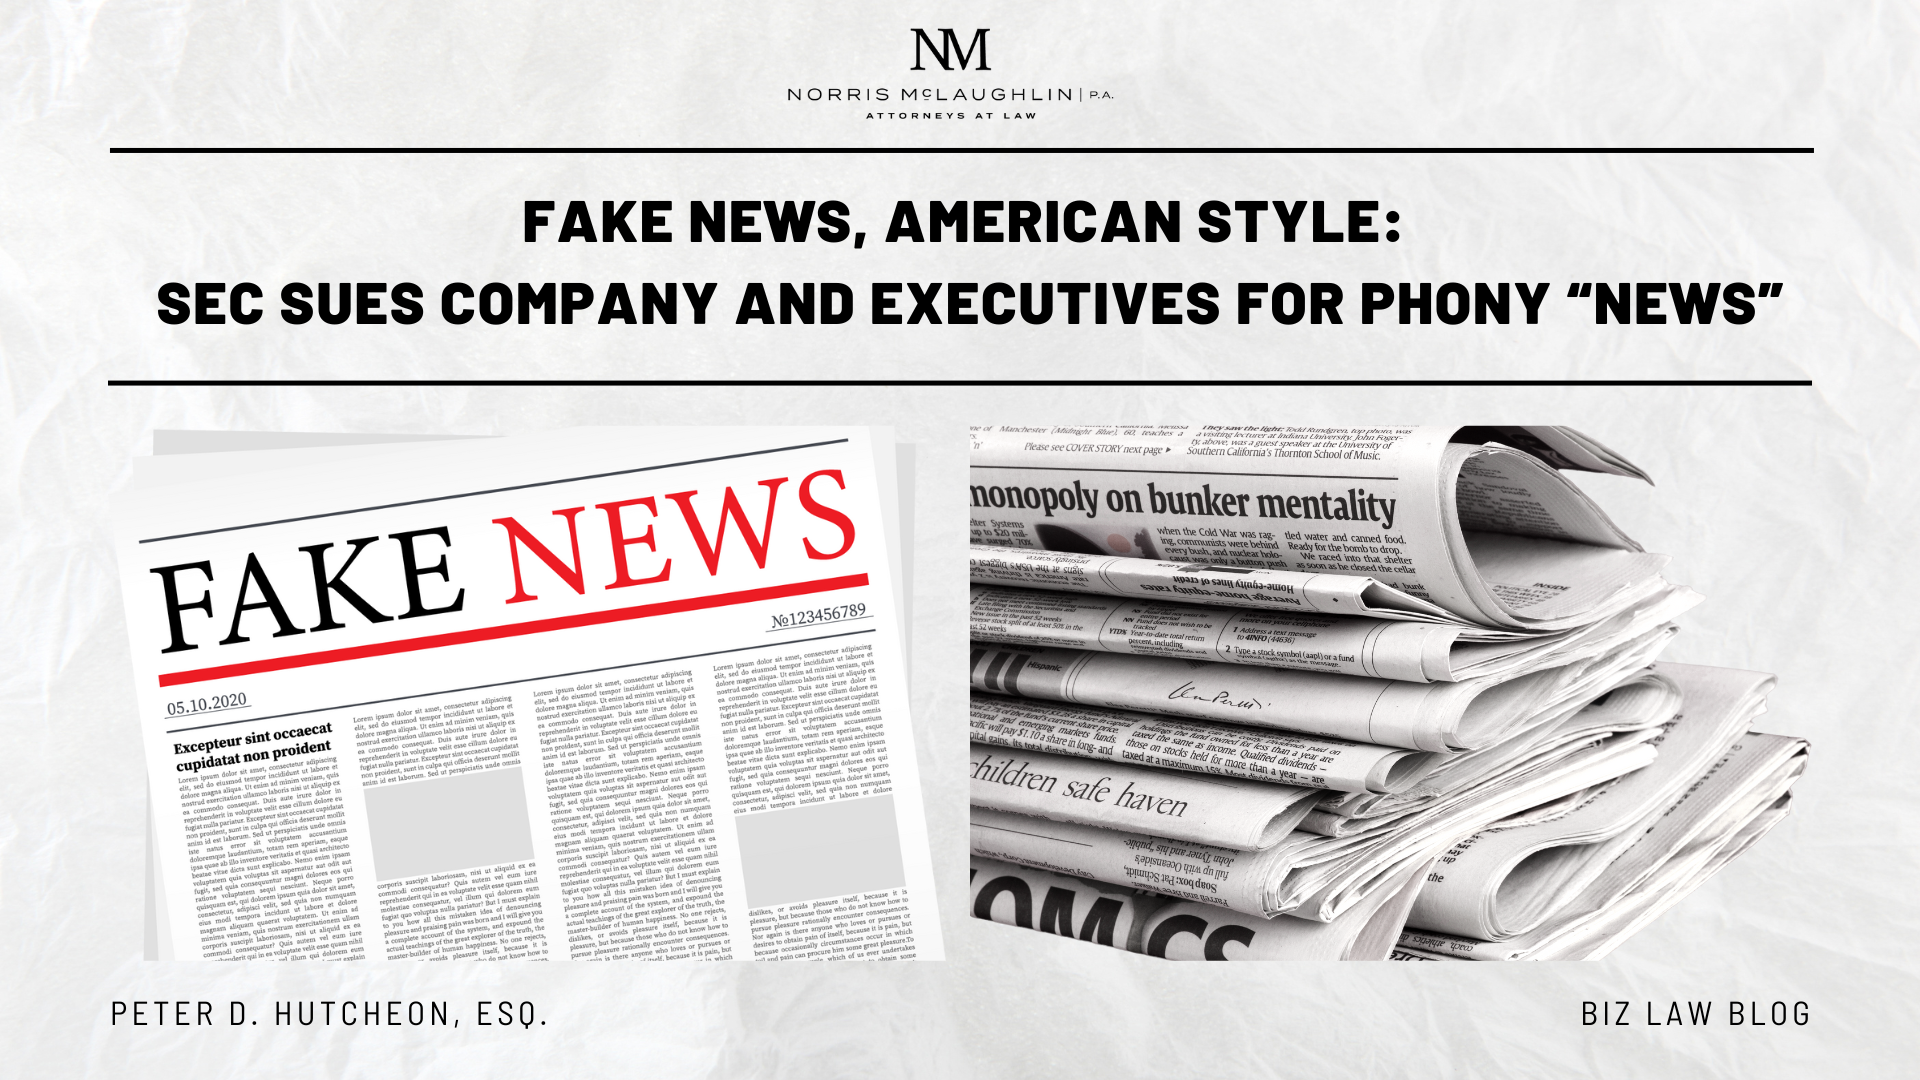 Fake News, American Style: SEC Sues Company and Executives for Phony “News”